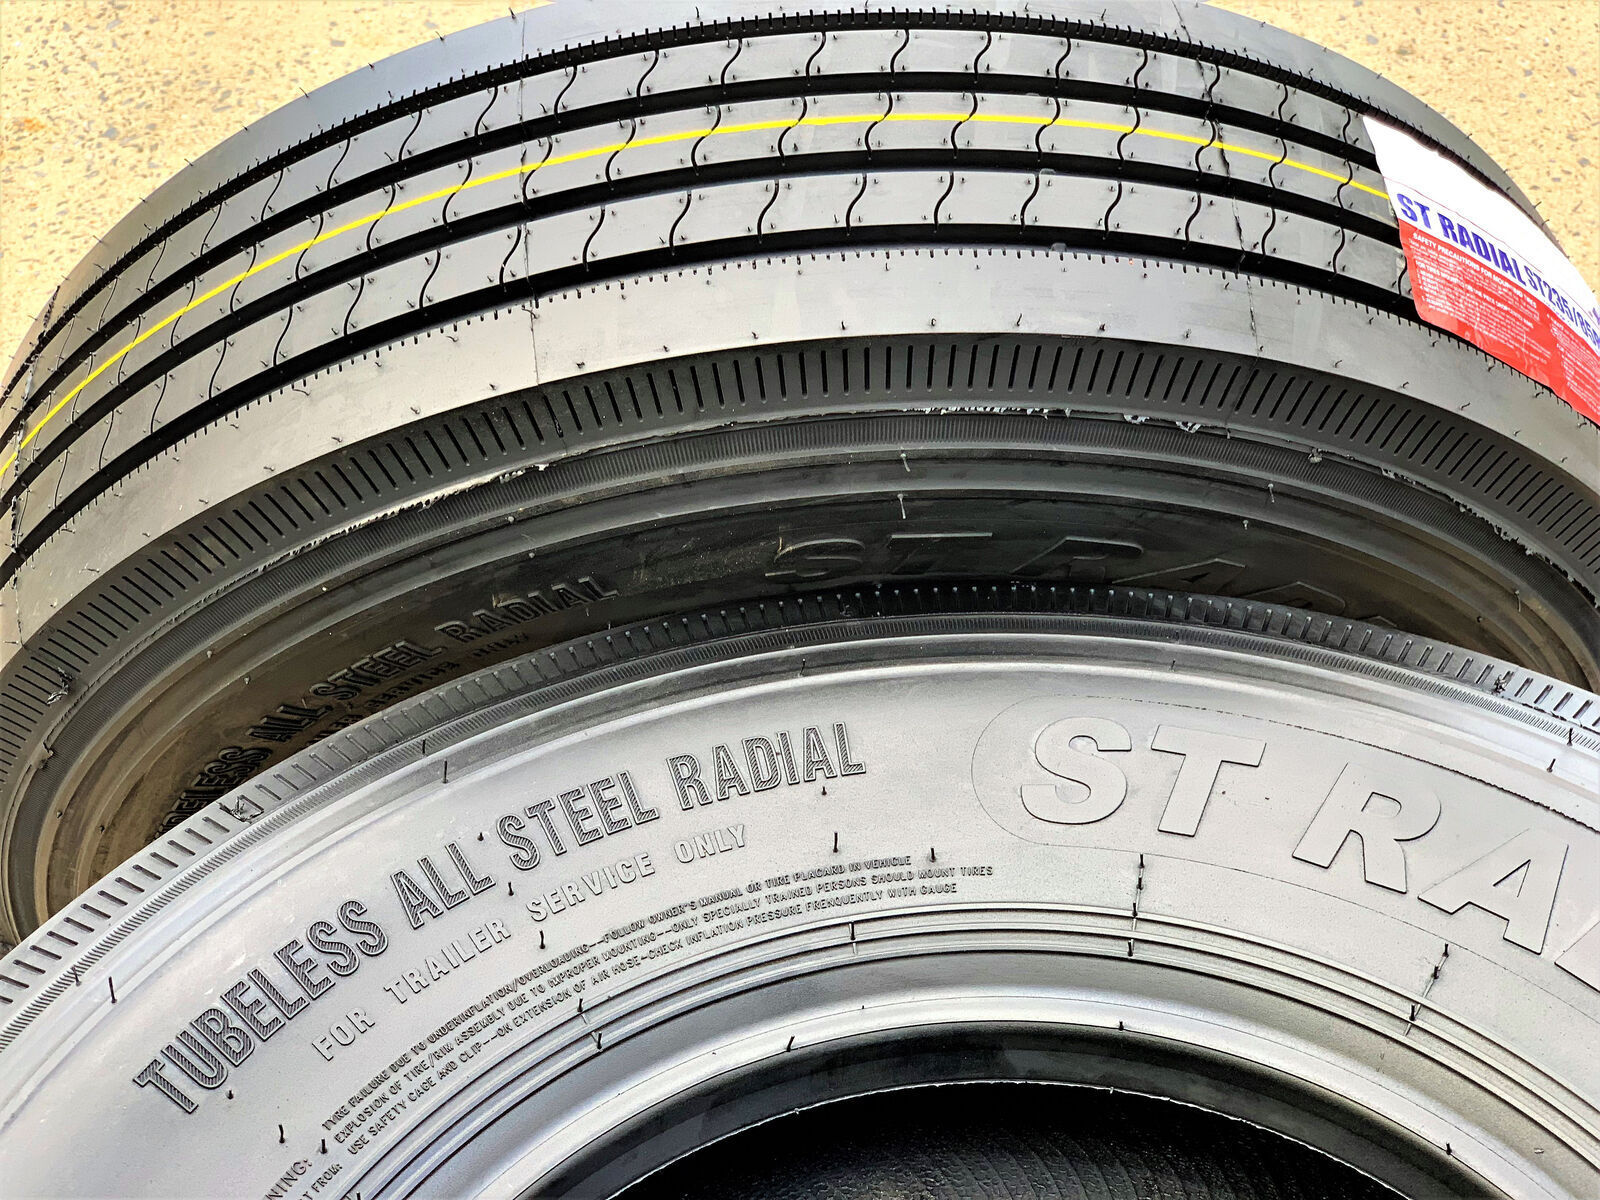 2 Tires Transeagle All Steel ST Radial ST 235/80R16 Load G 14 Ply Trailer